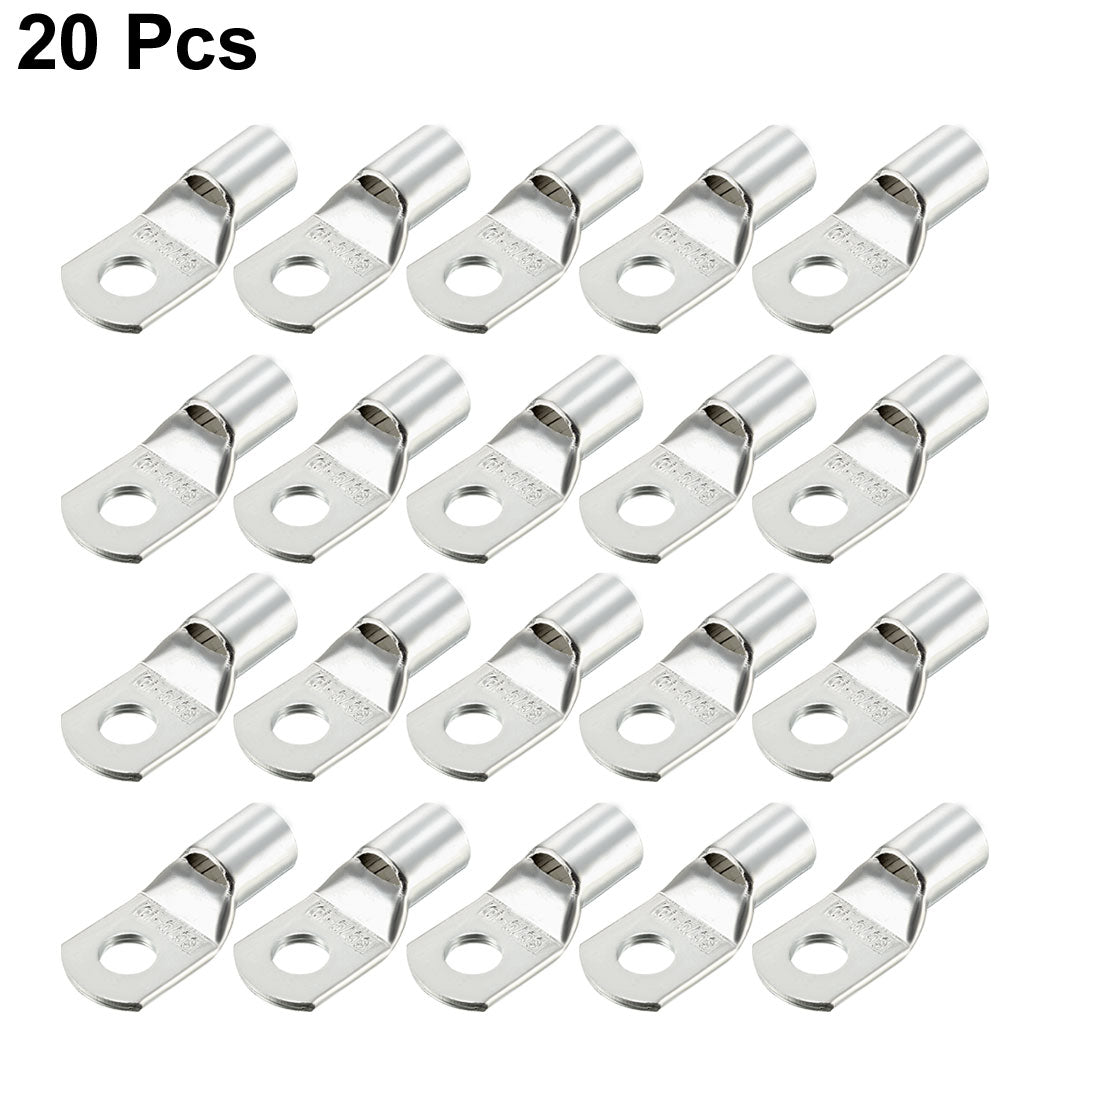 uxcell Uxcell 20Pcs SC70-10 Non-Insulated U-Type Copper Crimp Terminals 11.7mm Wire Connector Silver Tone